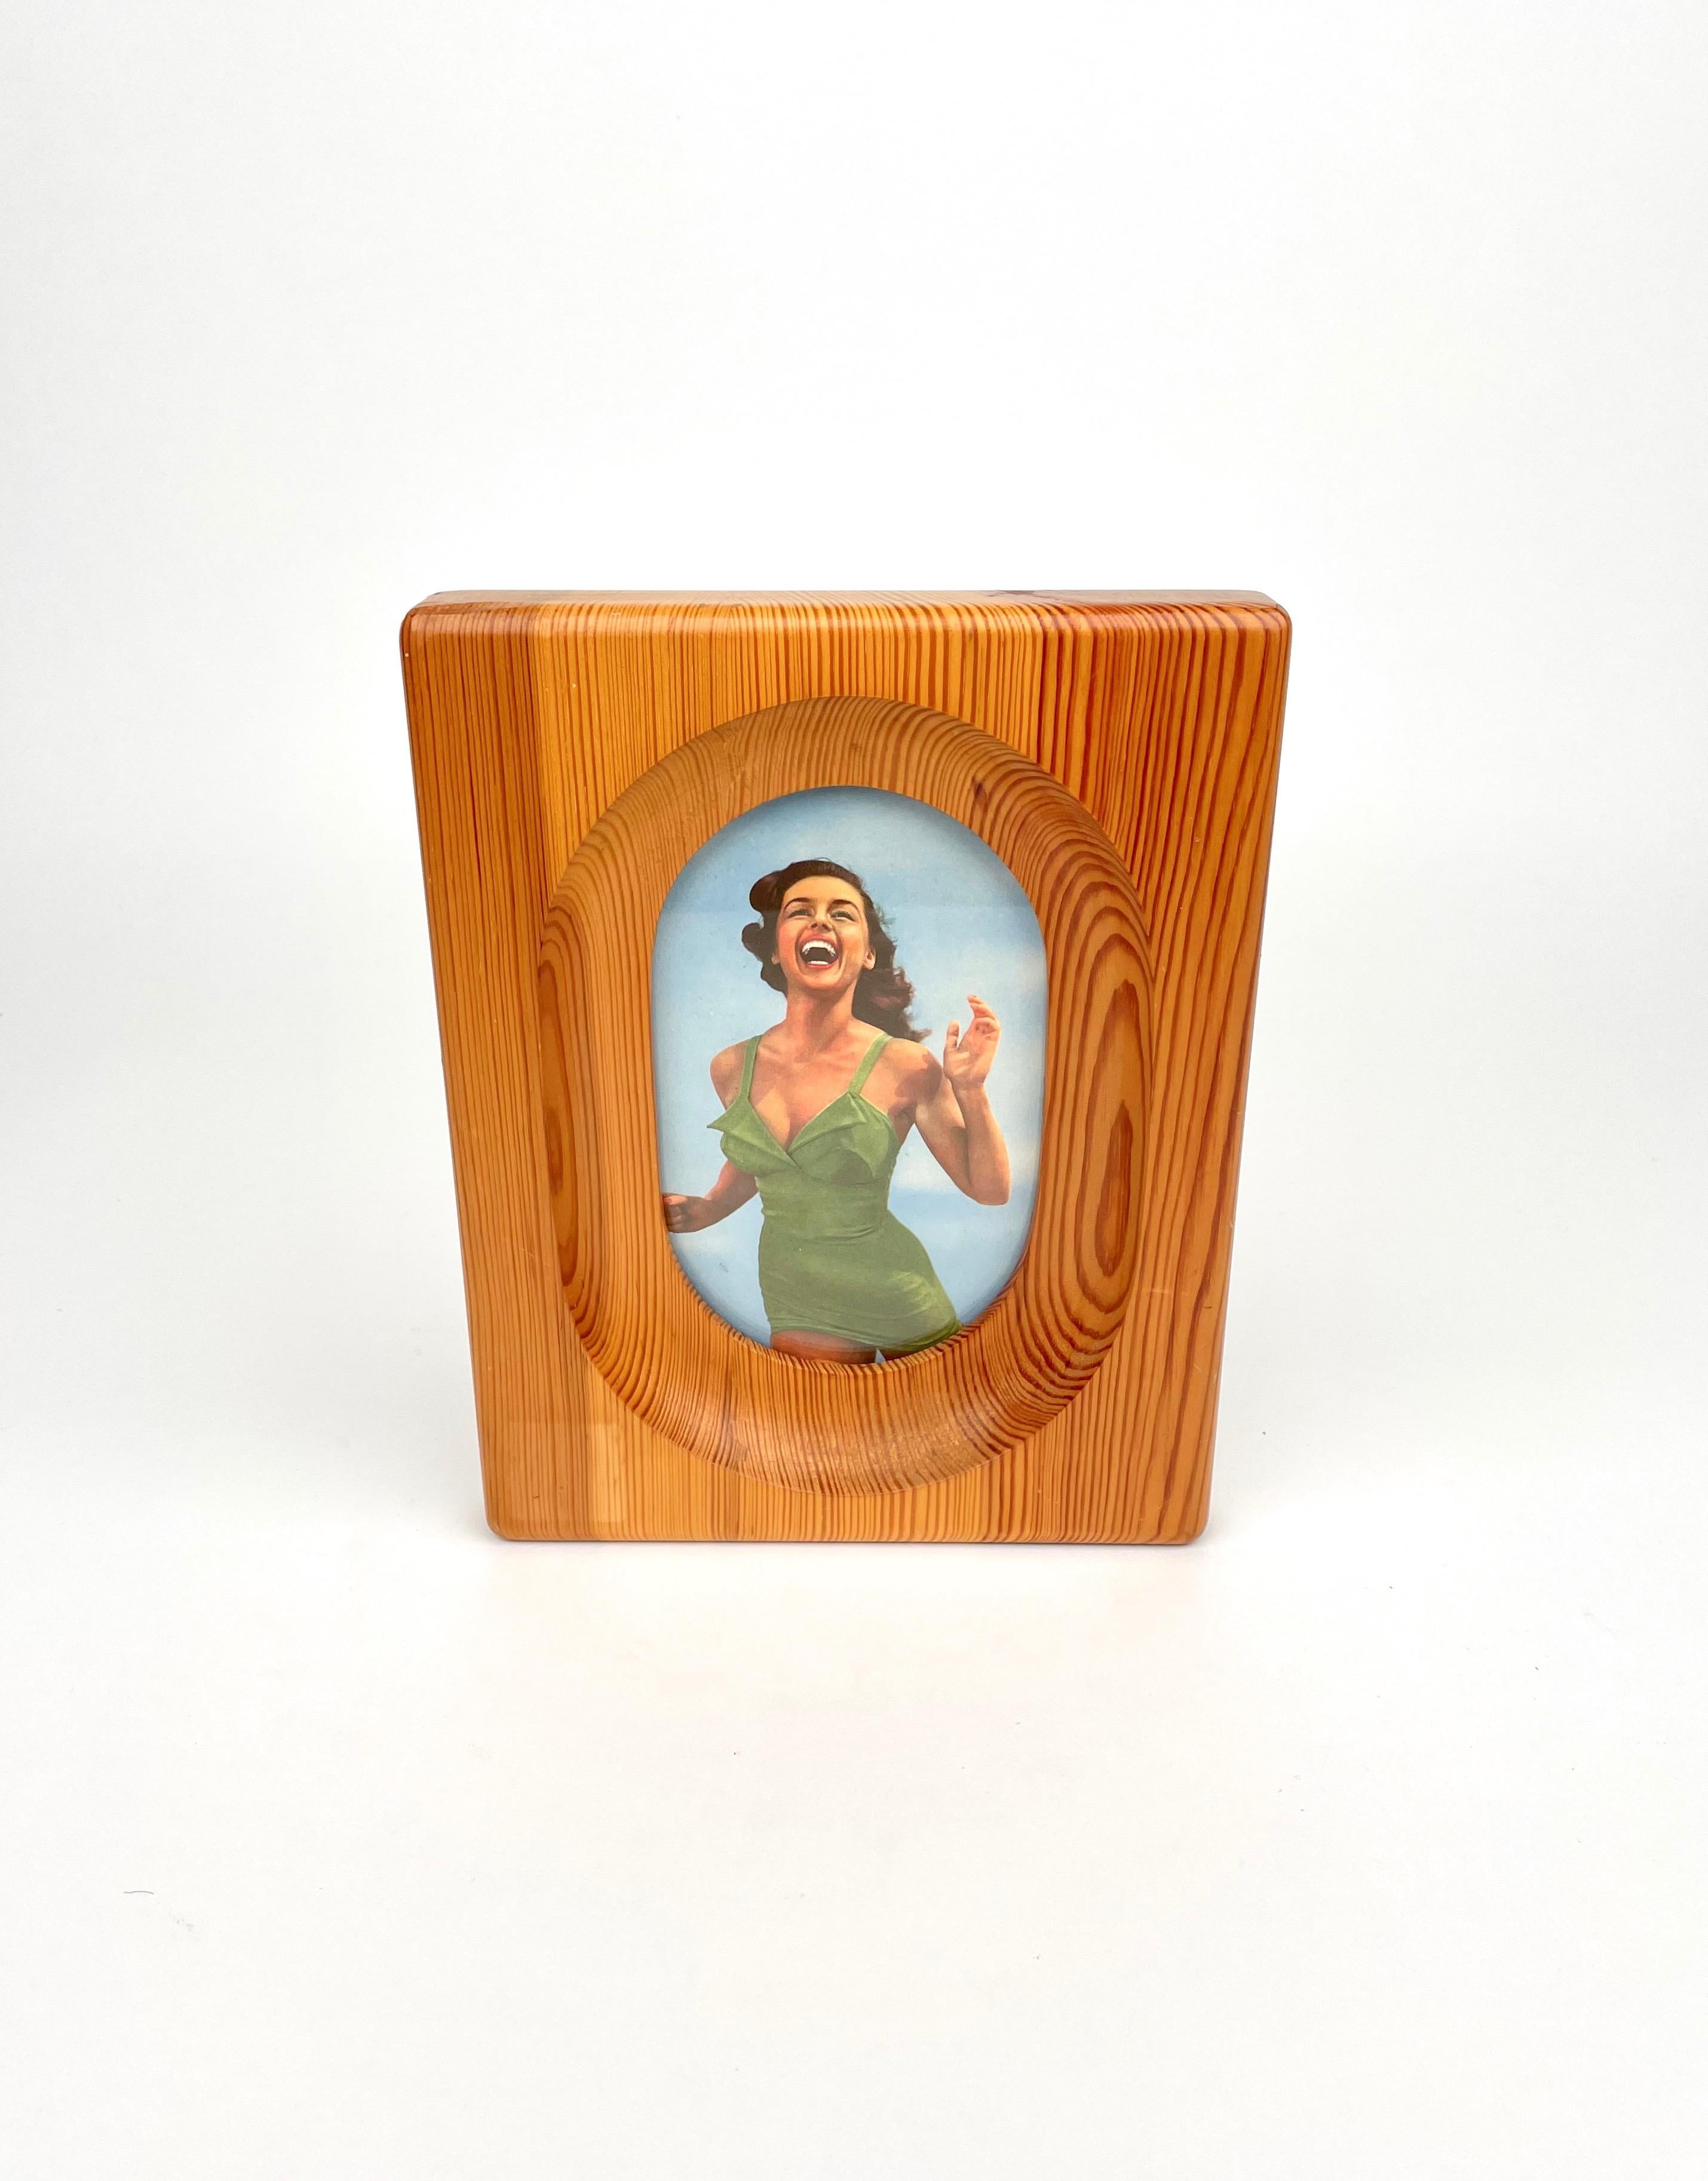 Italian Wood and Glass Picture Frame by Alvar Aalto for Artek Italy, 1960s For Sale